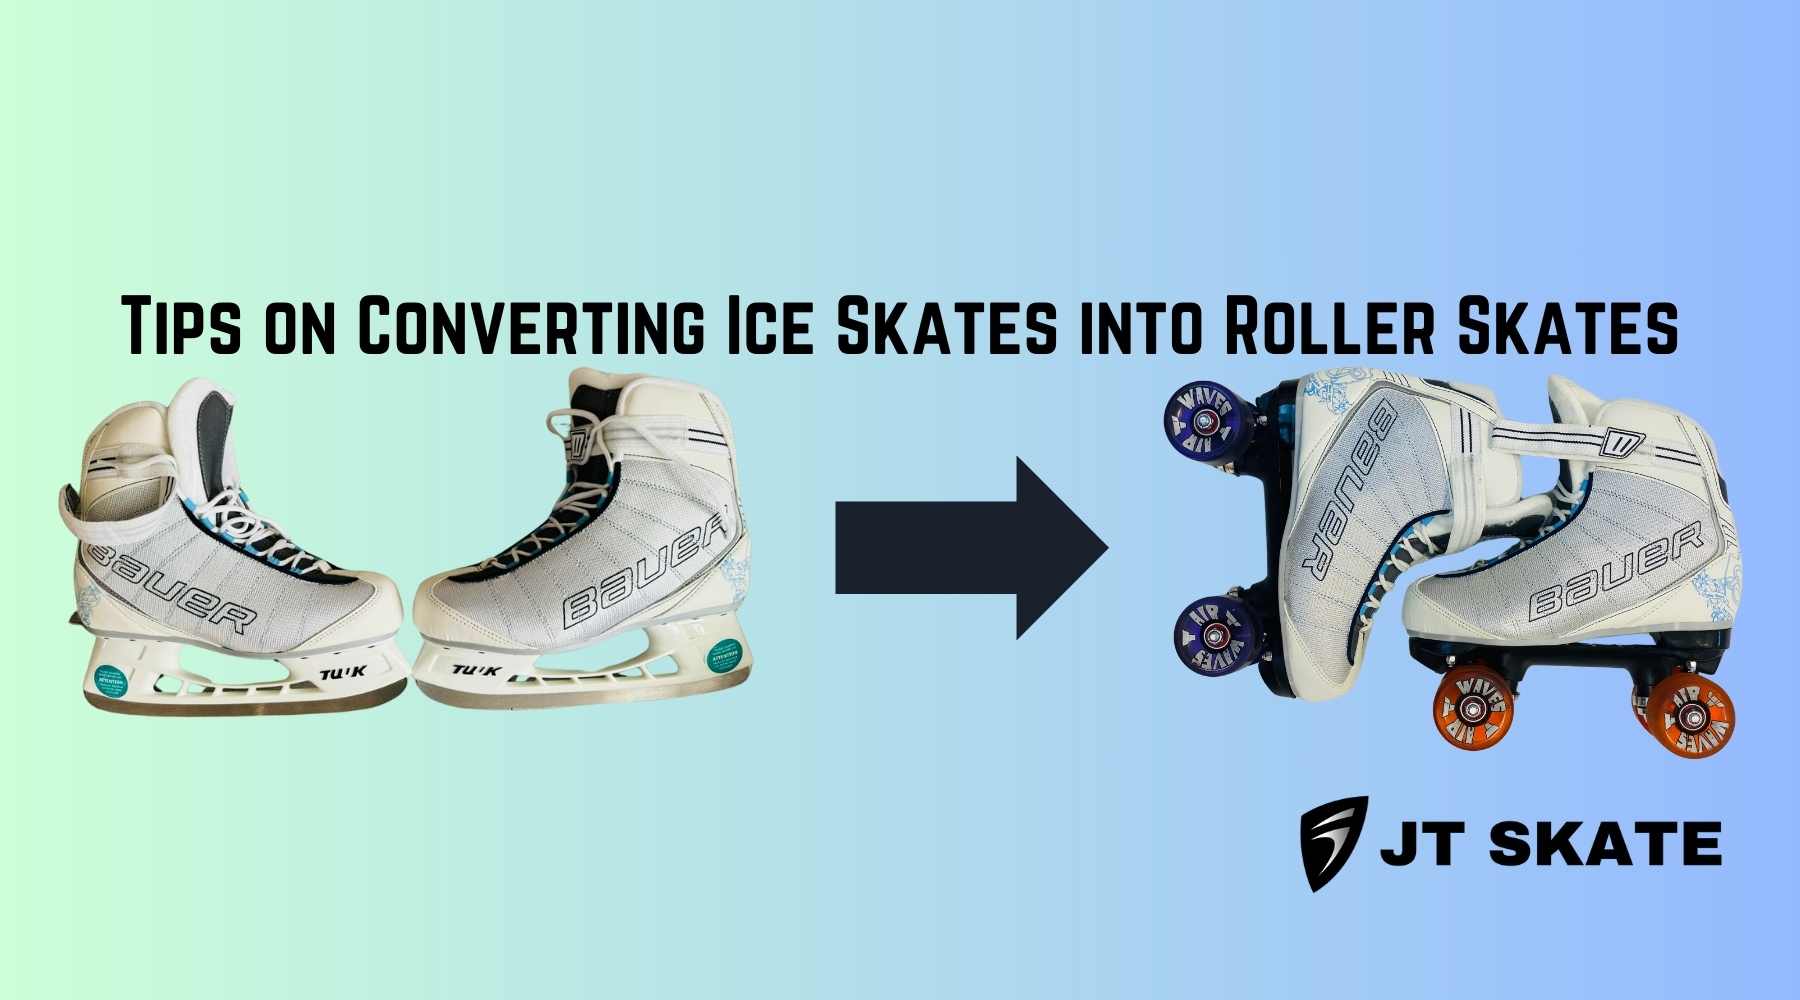 How to Convert Bauer and CCM Ice Hockey Skates to Quad Roller Skates